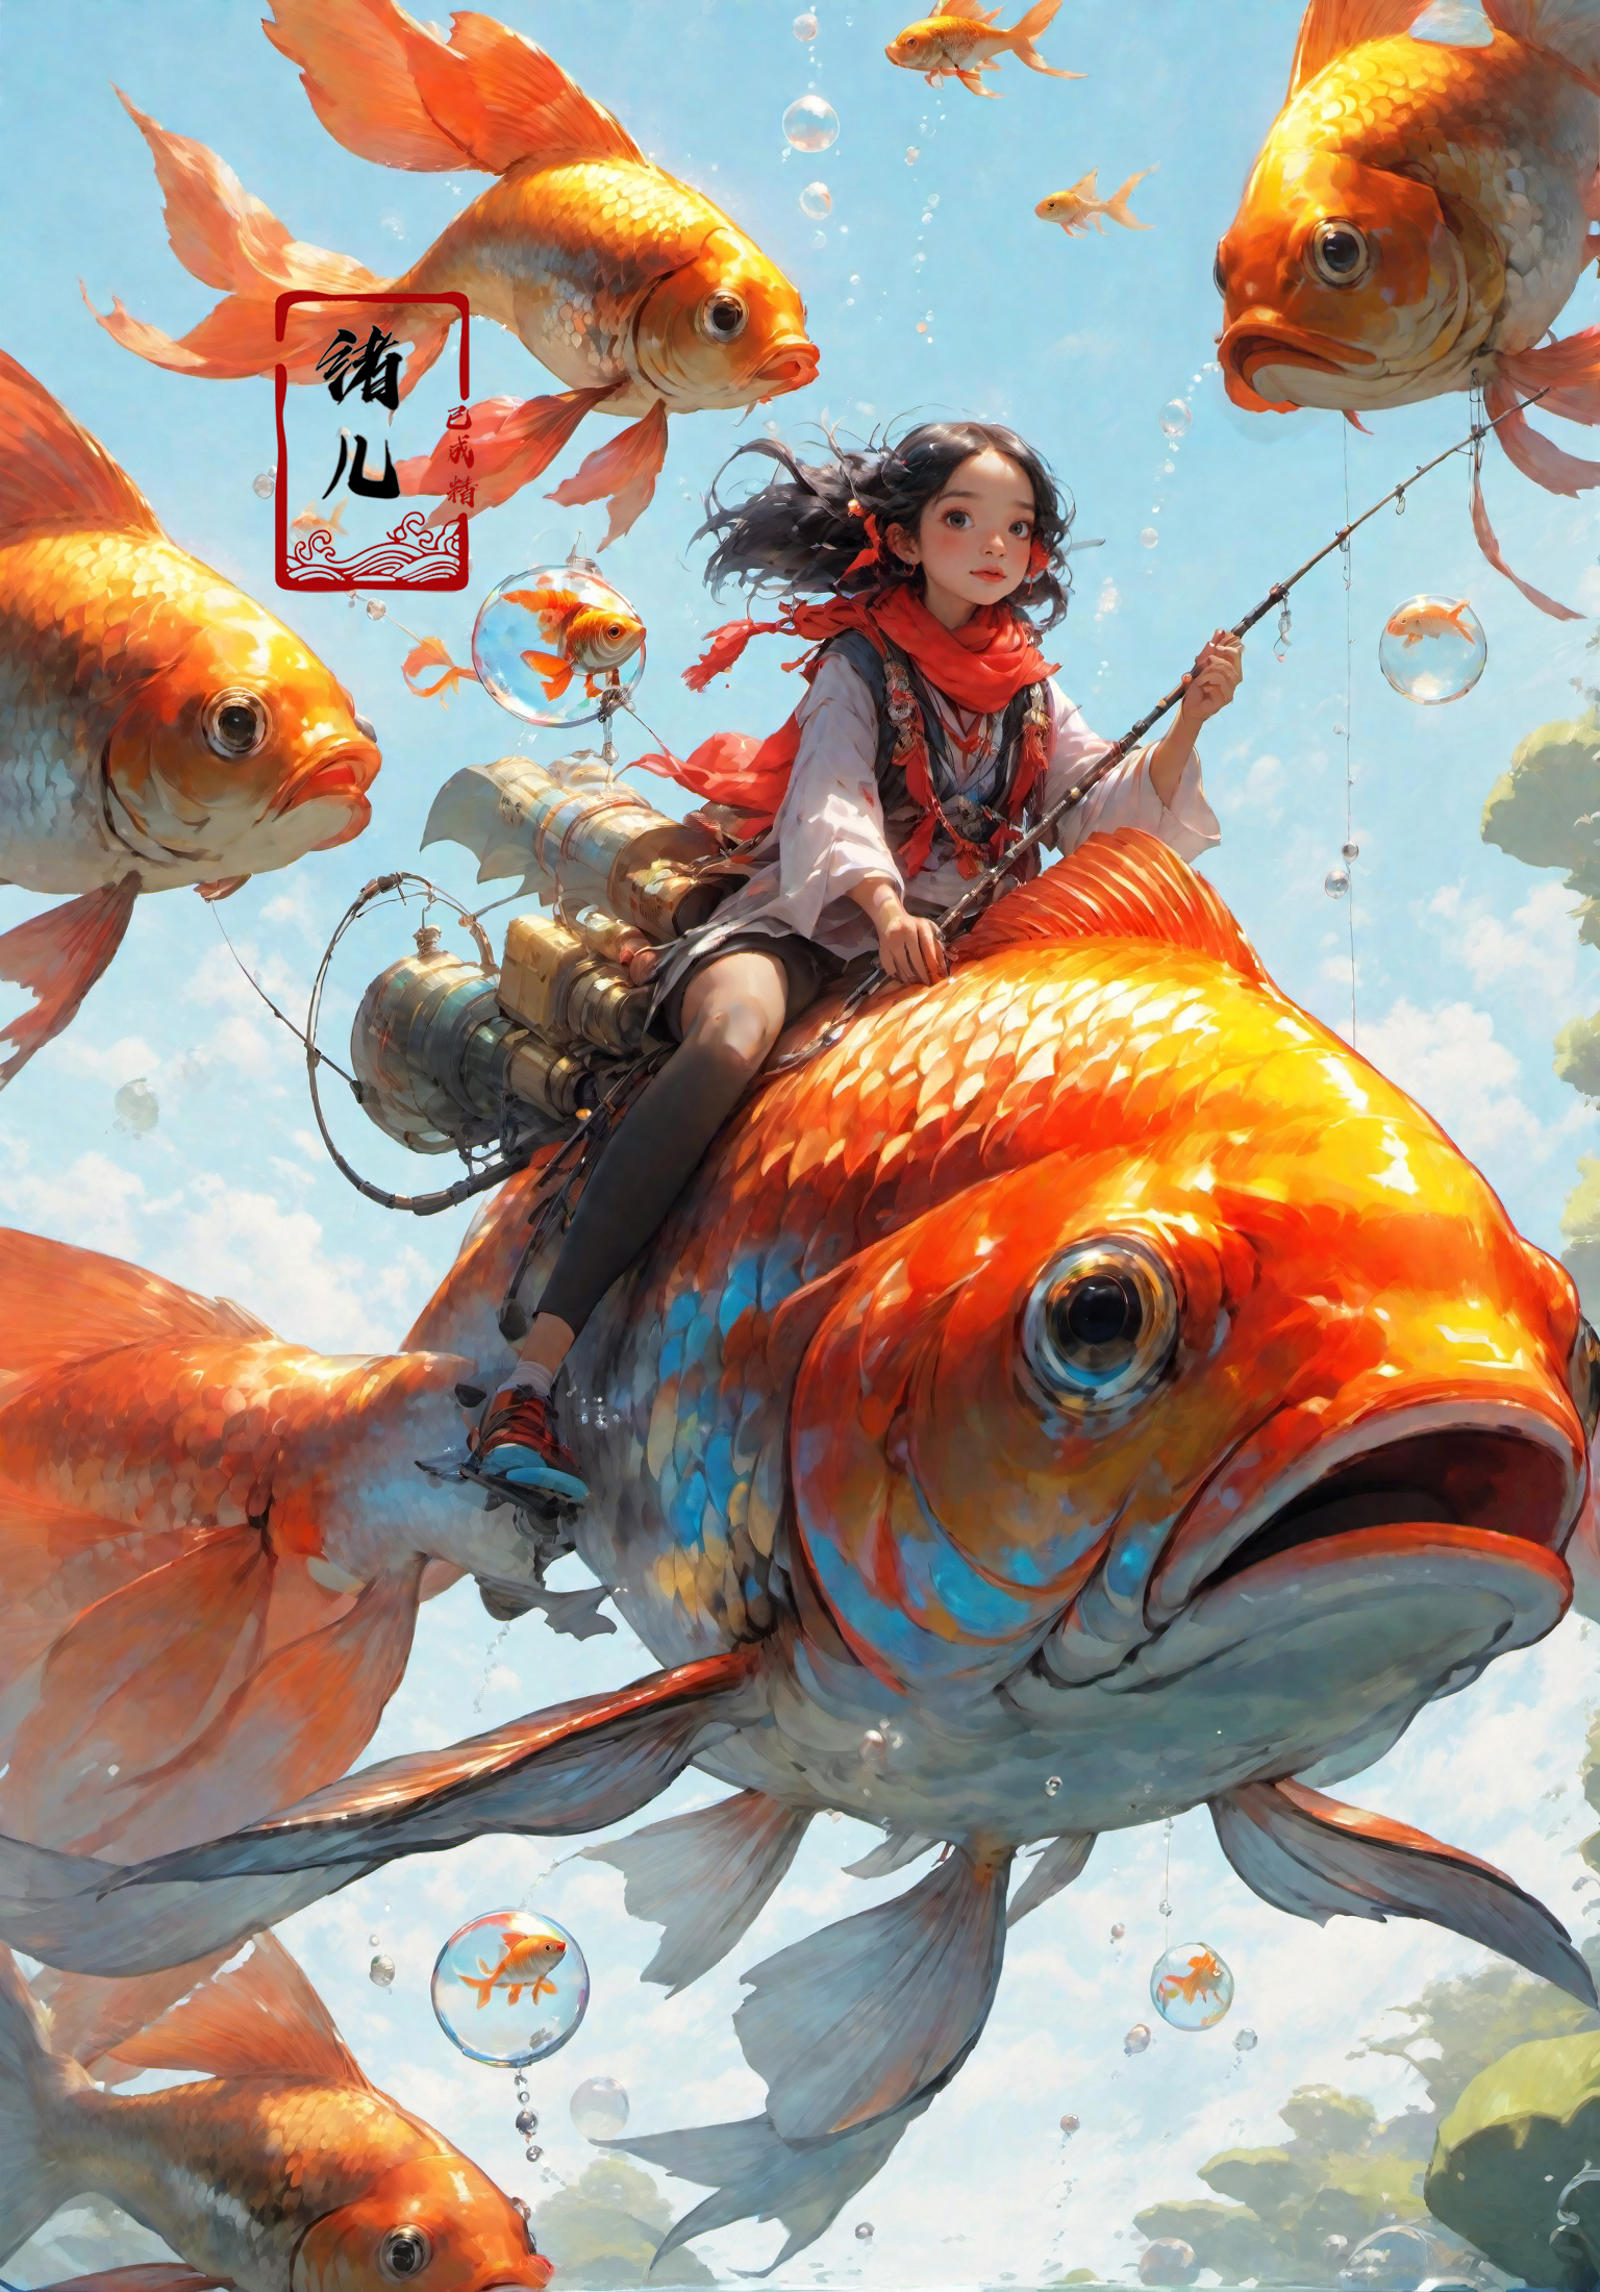 A girl riding a giant goldfish in a painting.